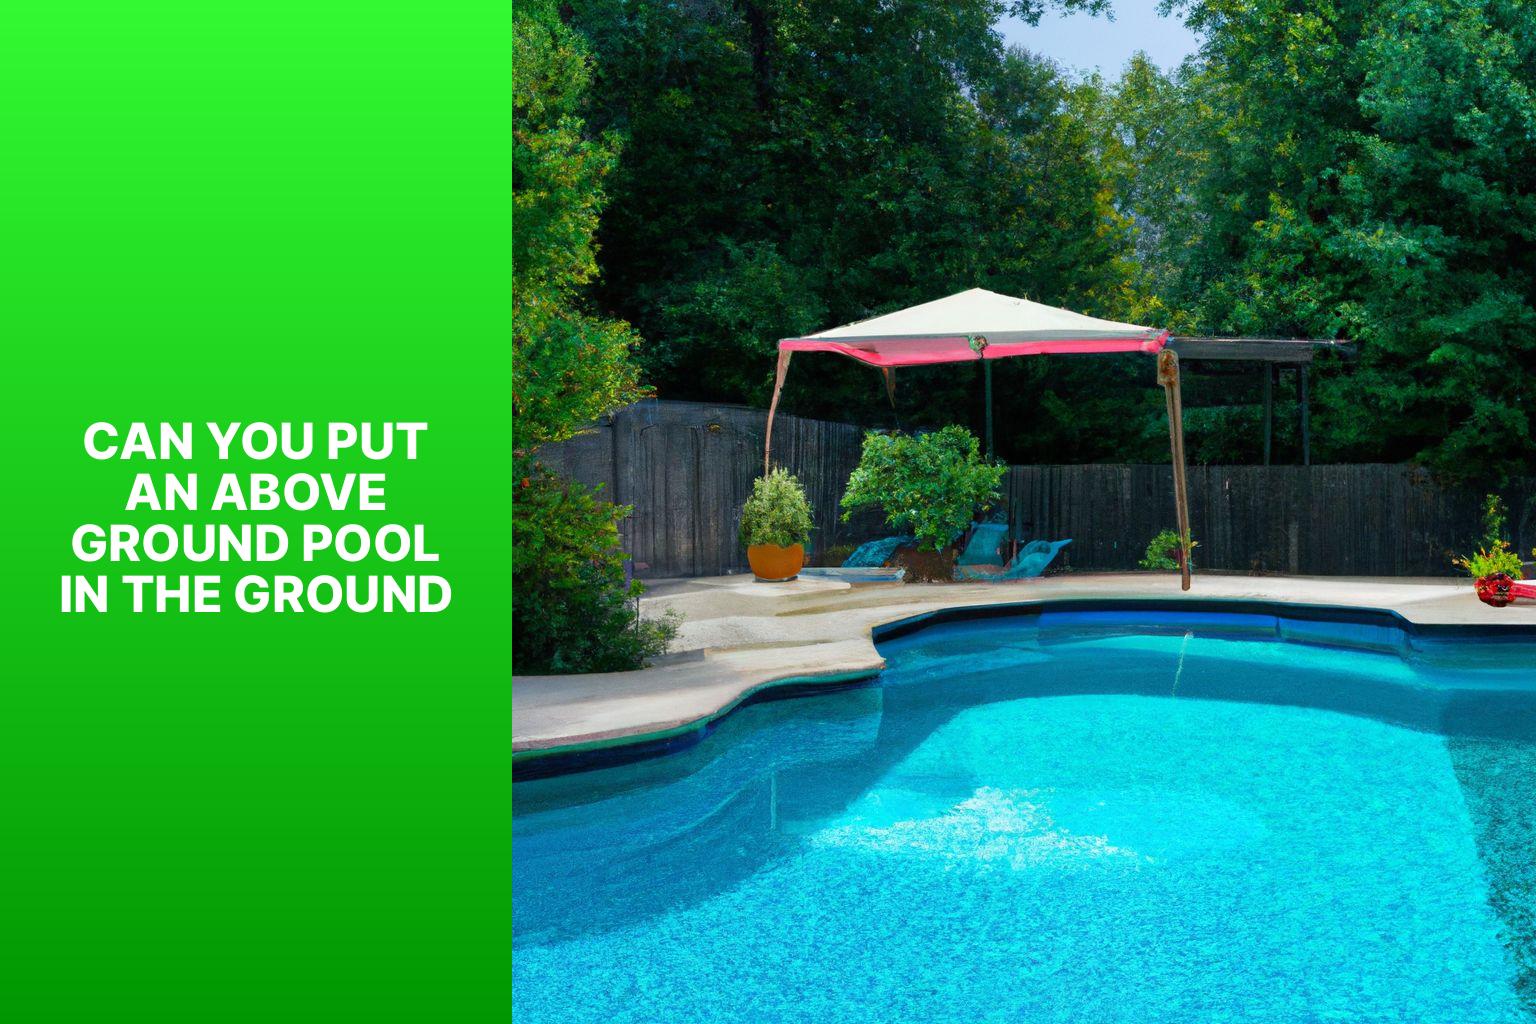 can you put an above ground pool in the groundu4t3 Can You Put an Above Ground Pool in the Ground?